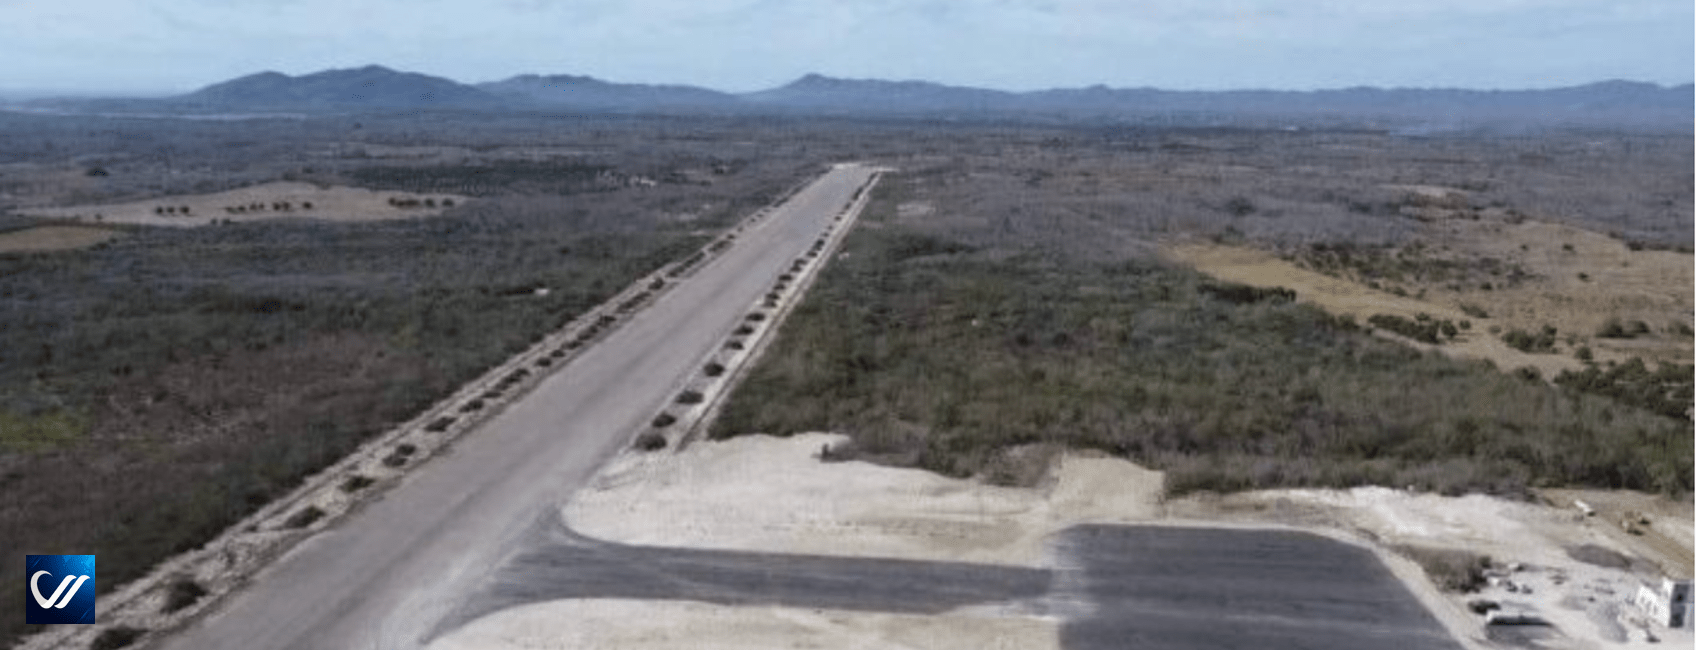 First phase of Tomatlán international airport to be ready in May 2023.